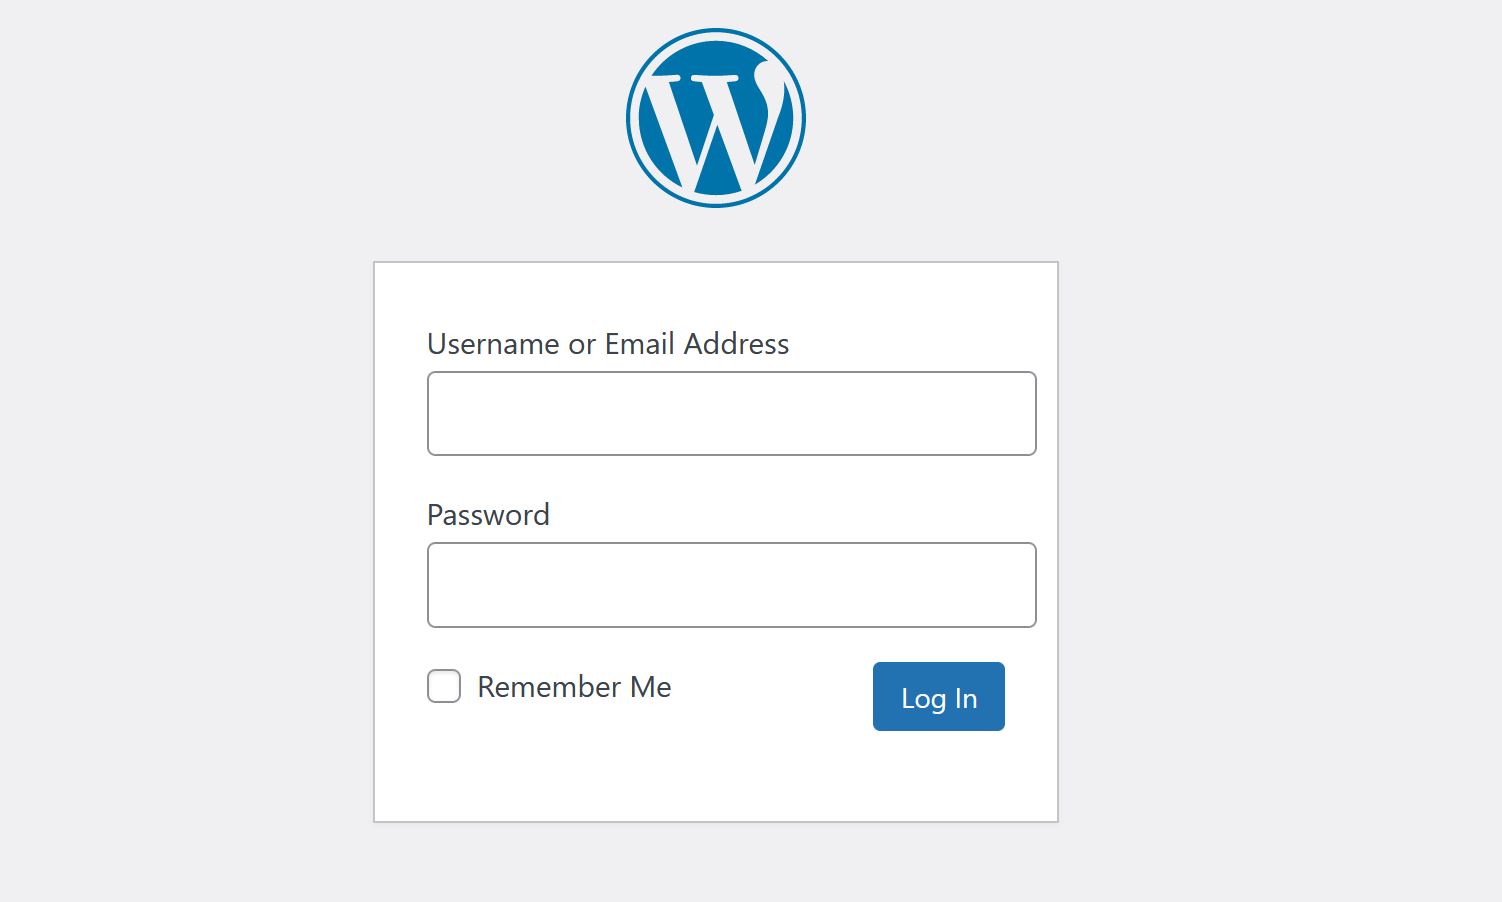 Redirect user to homepage after logout in WordPress account